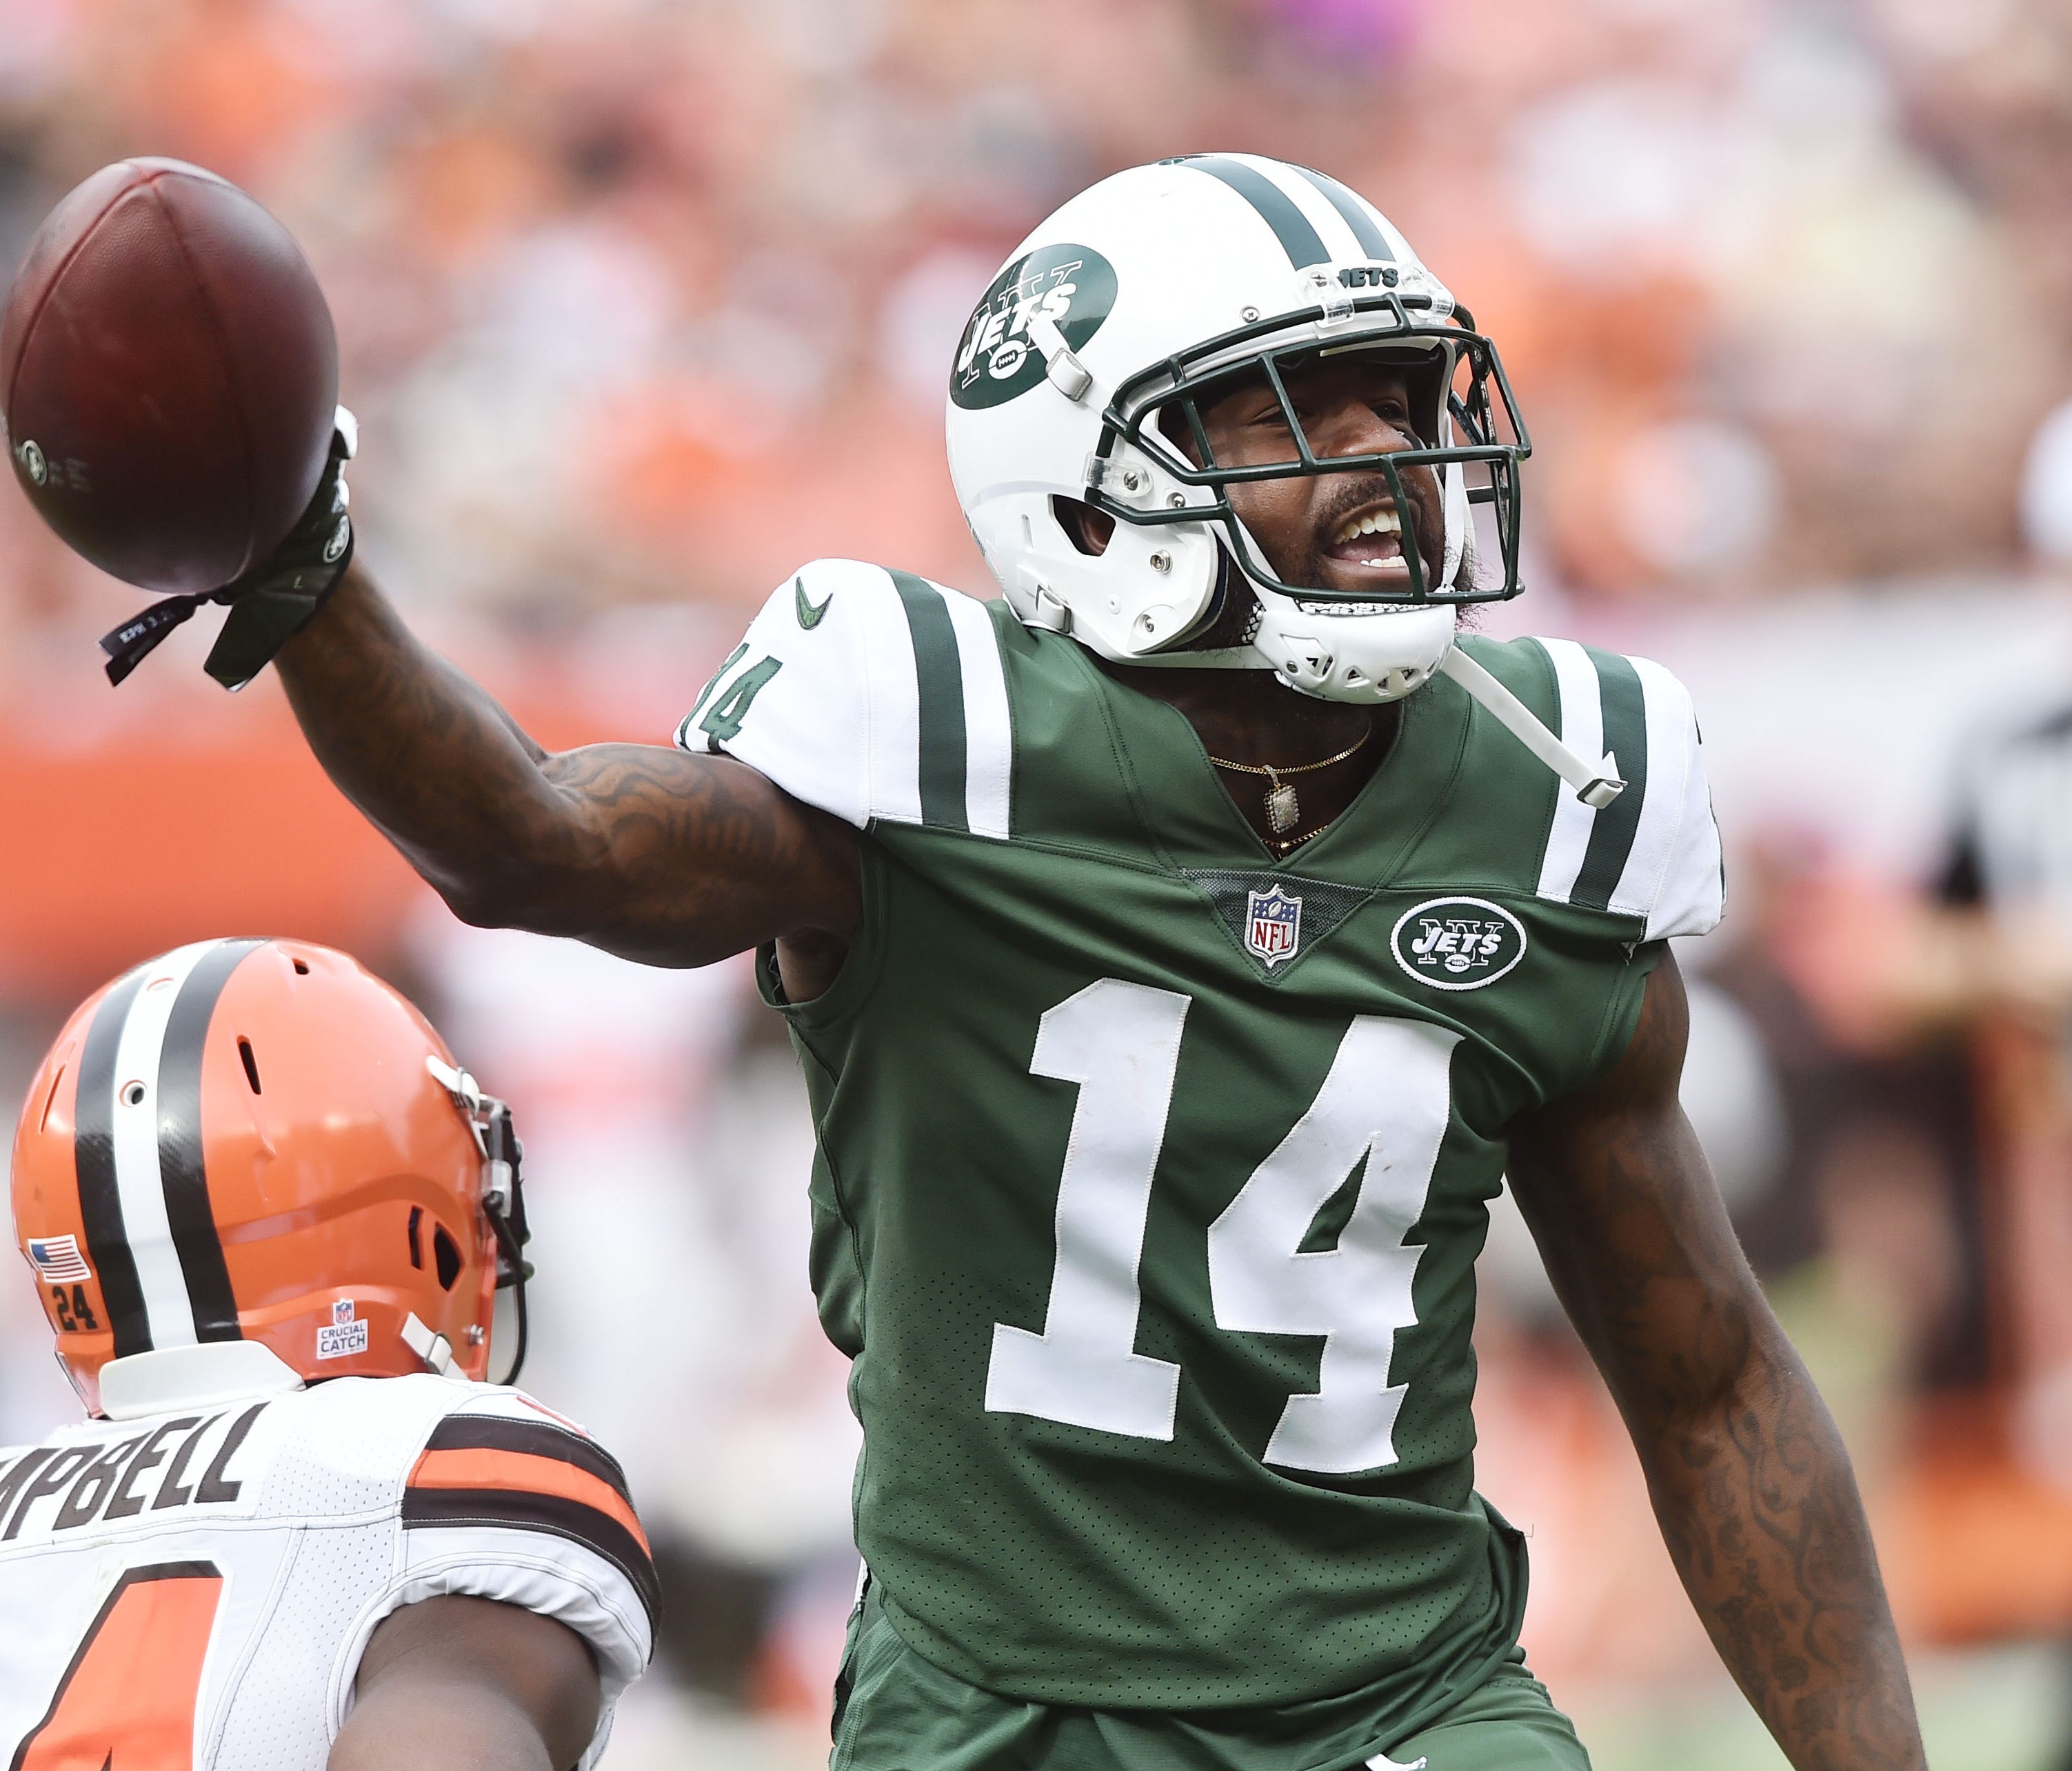 Oct 8, 2017; Cleveland, OH, USA; New York Jets wide receiver Jeremy Kerley (14) celebrates after a first down catch during the second half against the Cleveland Browns at FirstEnergy Stadium. Mandatory Credit: Ken Blaze-USA TODAY Sports